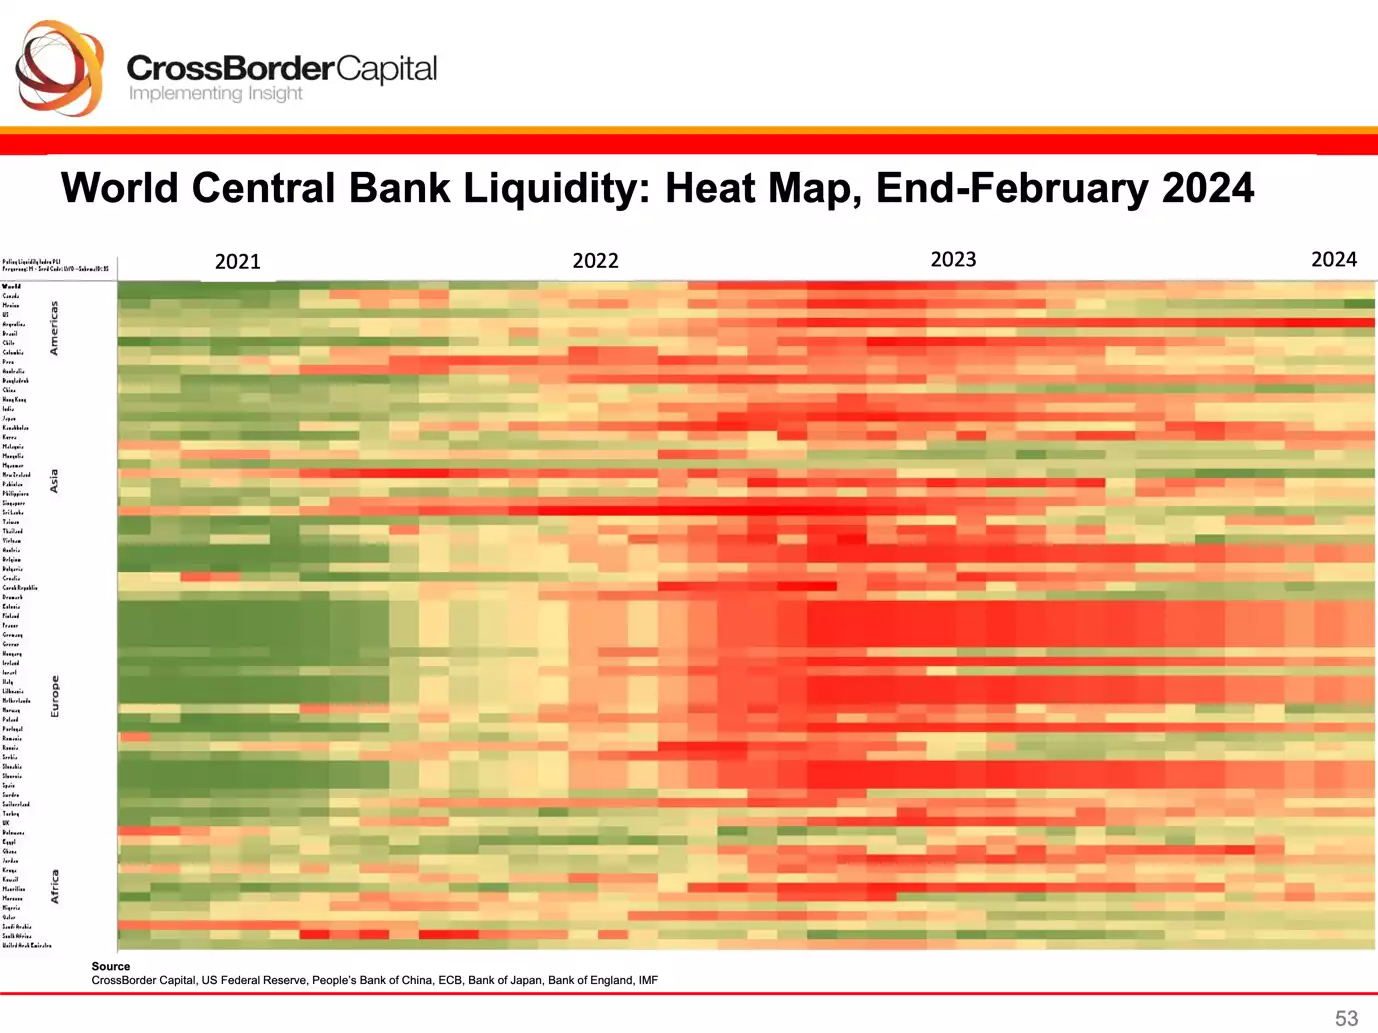 World Central Bank Liquidity: Heat Map, End-February 2024